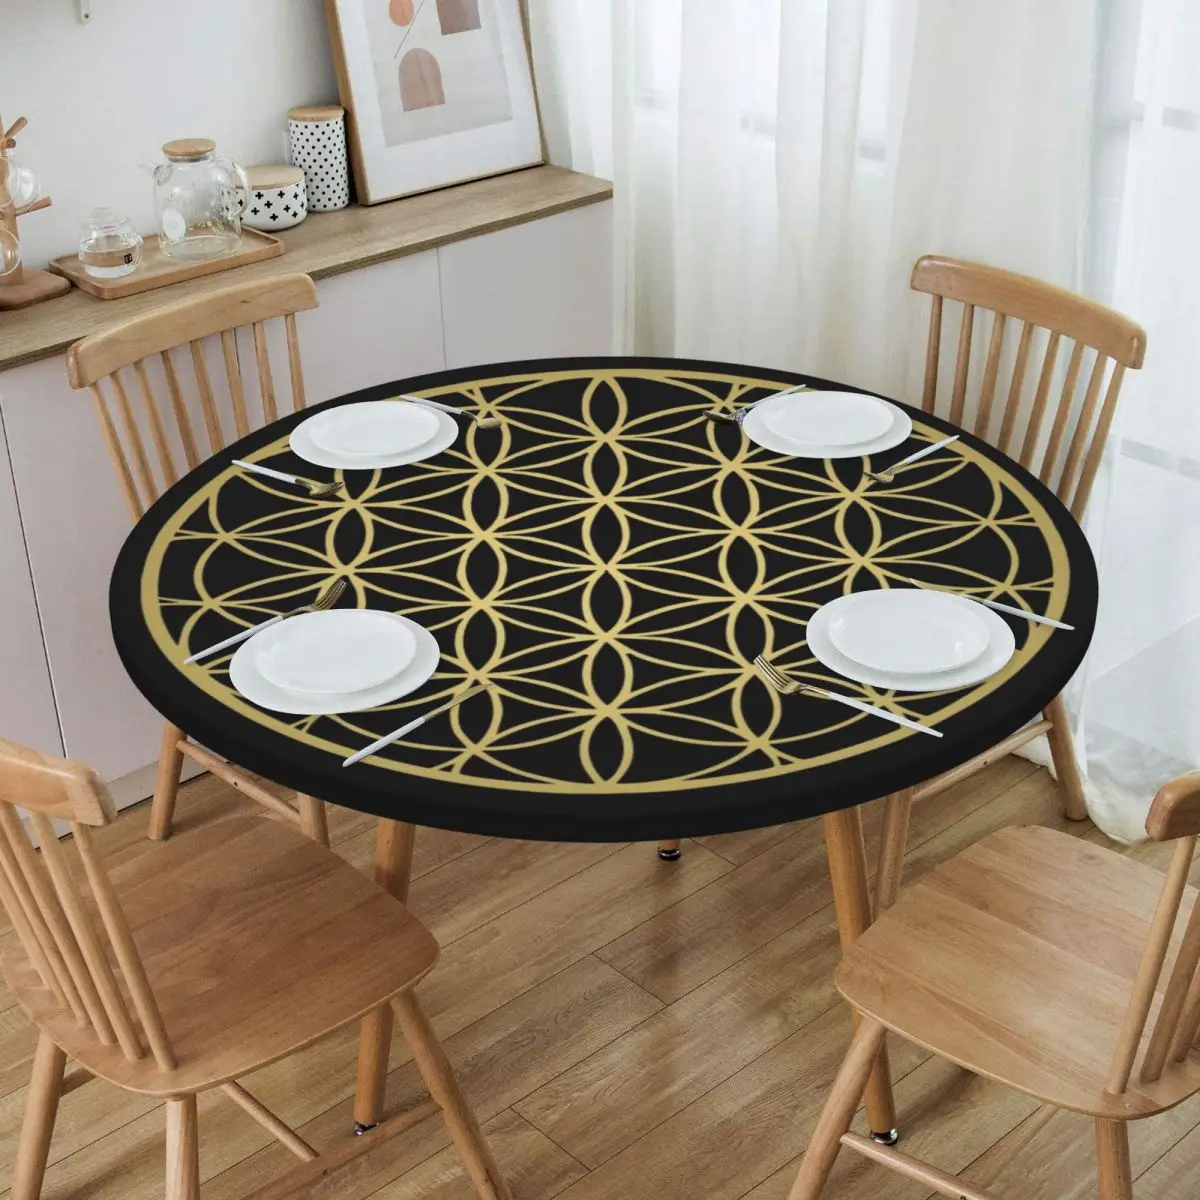 

Round Fitted Flower Of Life Mandala Gold Table Cloth Oilproof Tablecloth 45"-50" Table Cover Backed with Elastic Edge